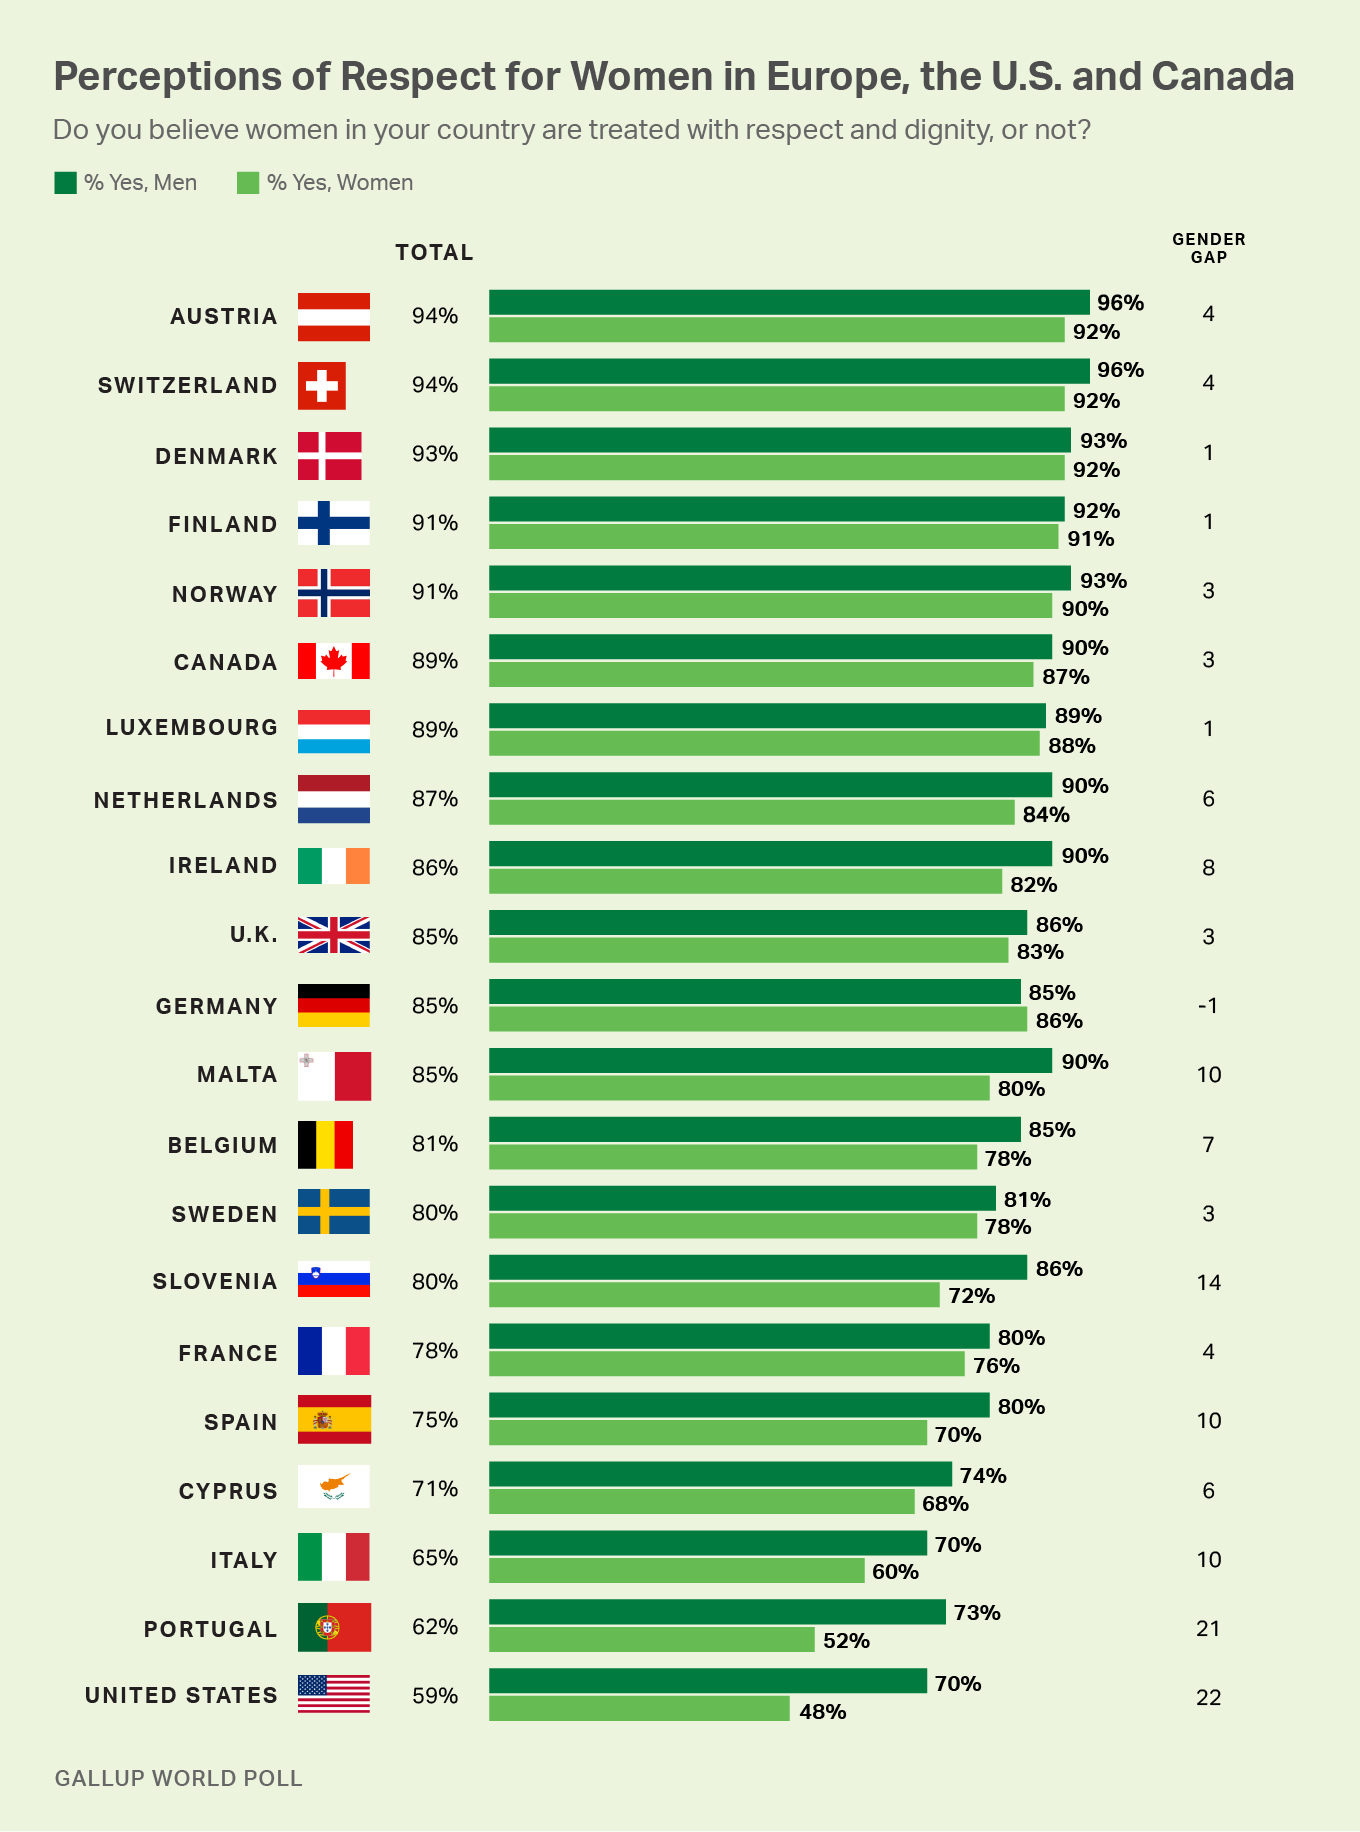 Perceptions of respect for women in Europe, the U.S. and Canada, among each country’s residents, men and women.